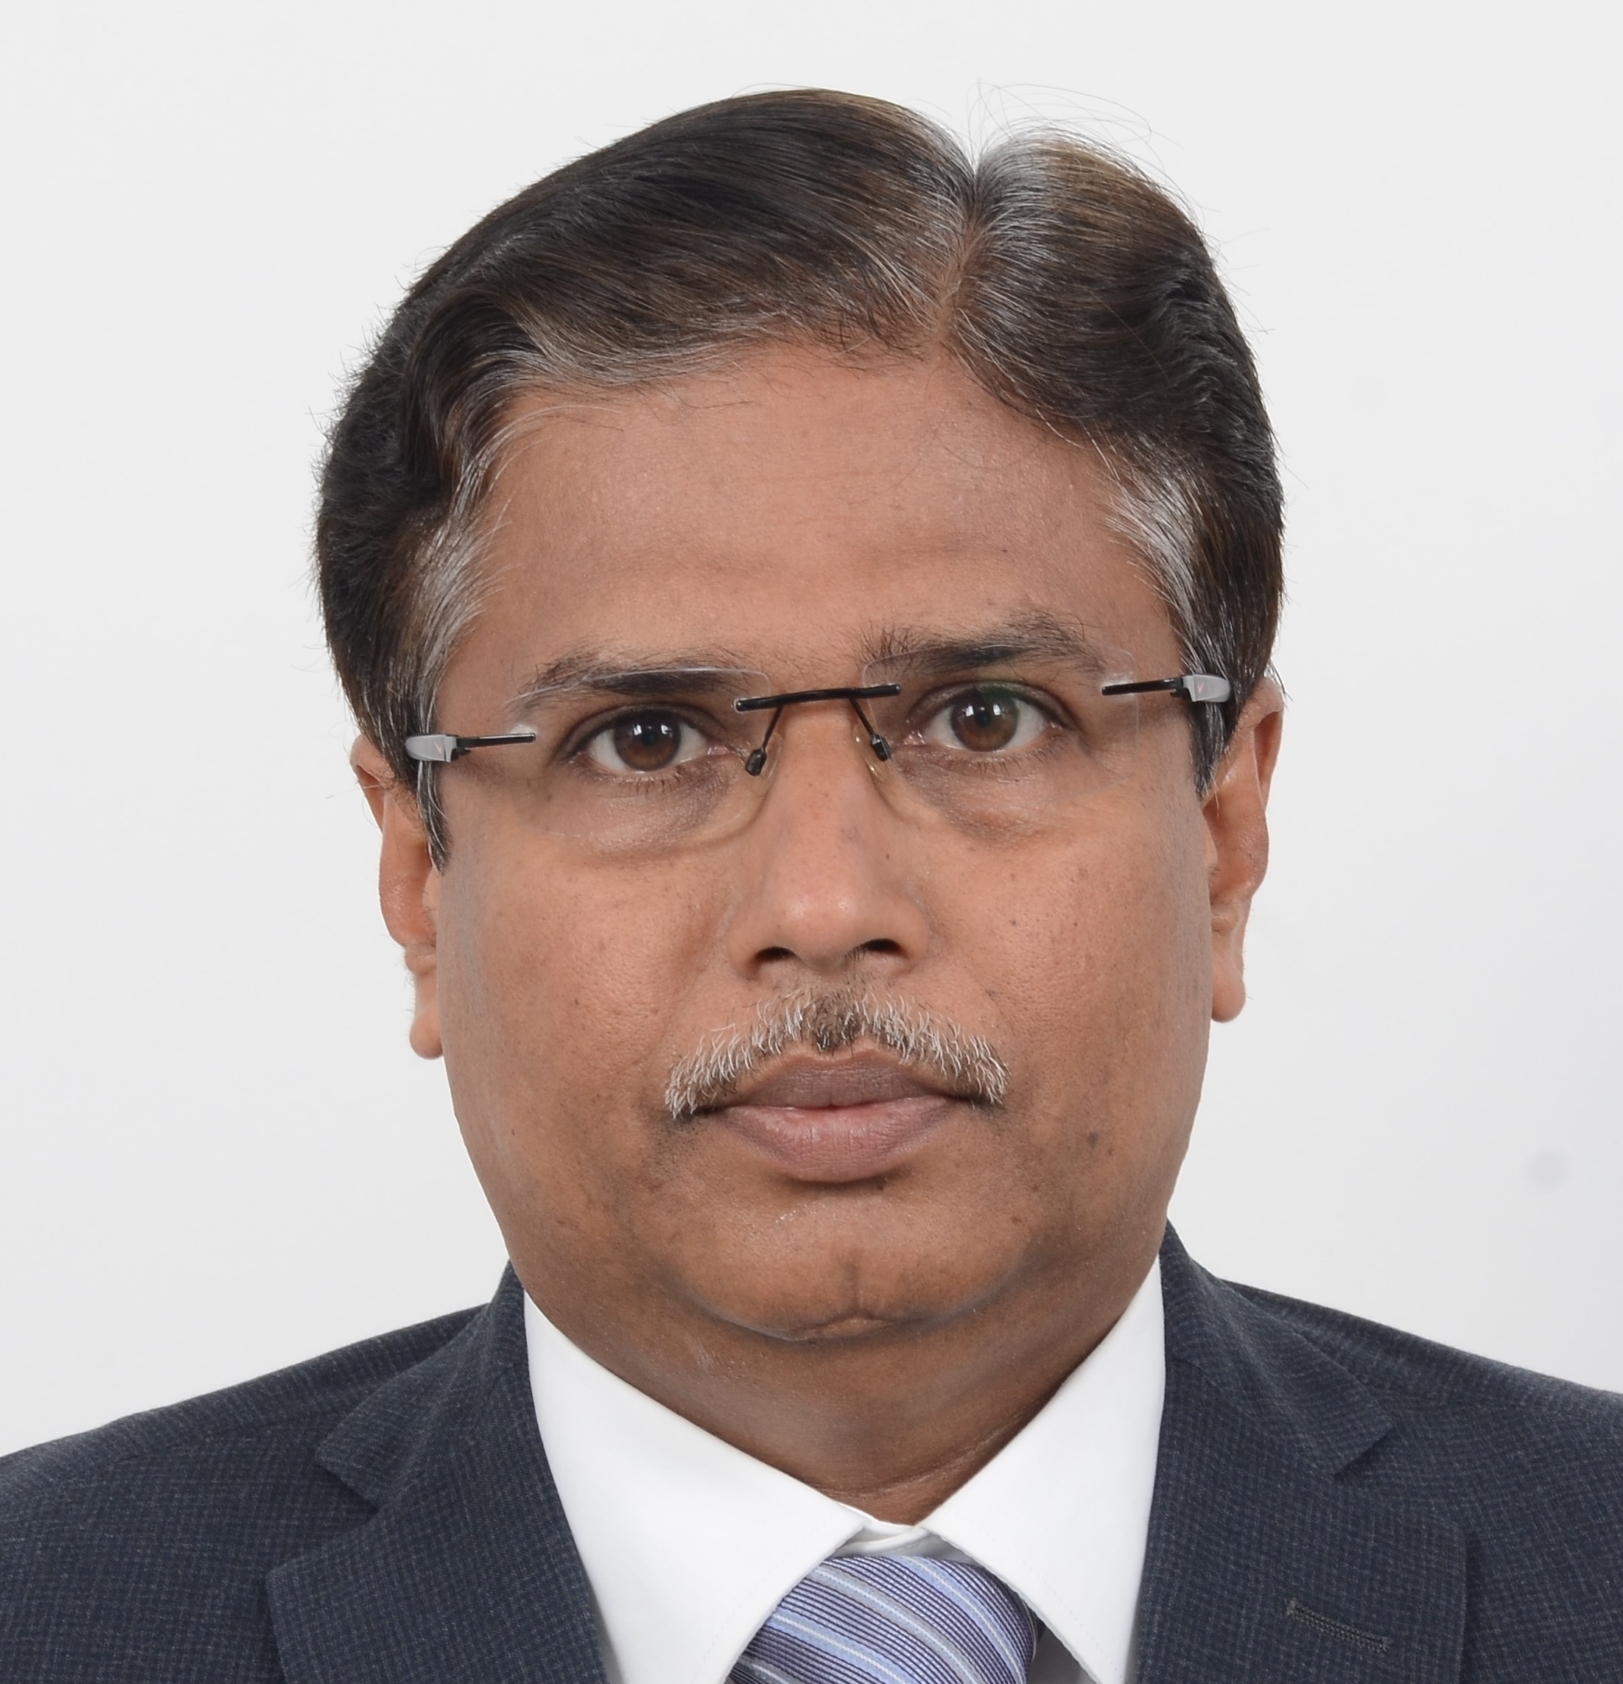 Ceat appoints new R&D head as focus shifts to European car tyre introduction